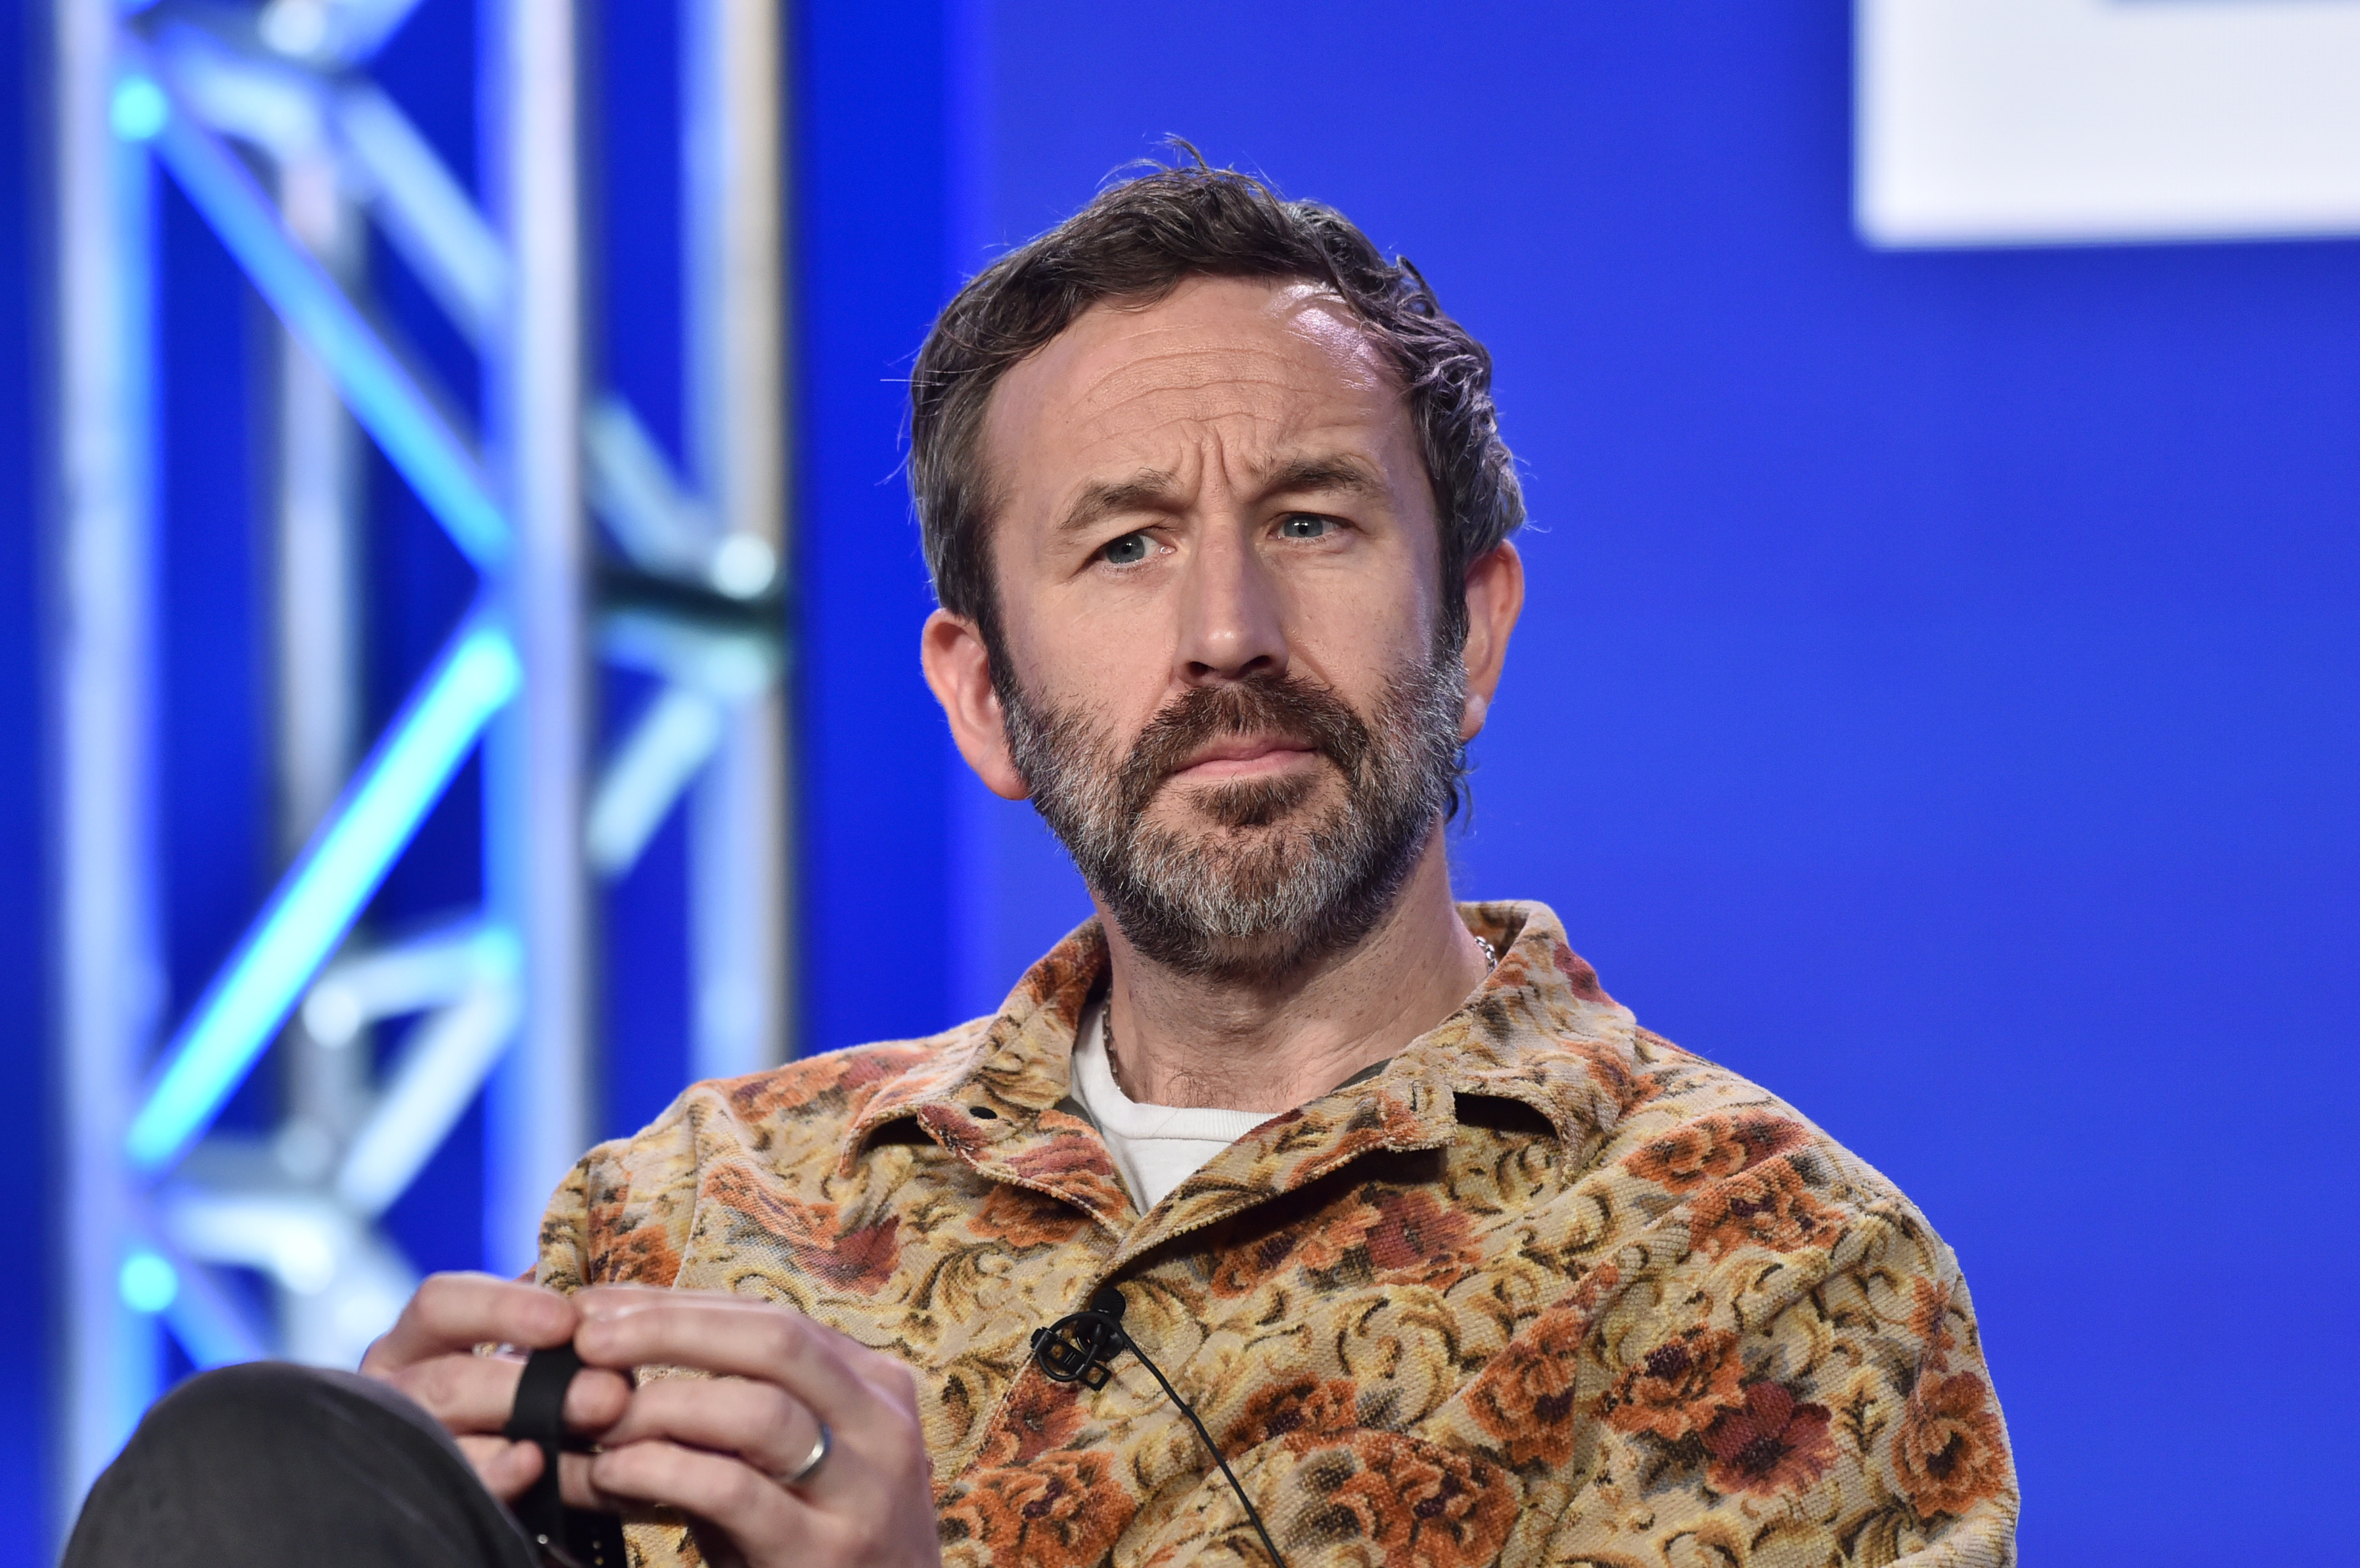 Chris O'Dowd at the Apple TV+ 2023 TCA Winter Press Tour for "The Big Door Prize," in January 2023, in Pasadena, California. | Source: Getty Images